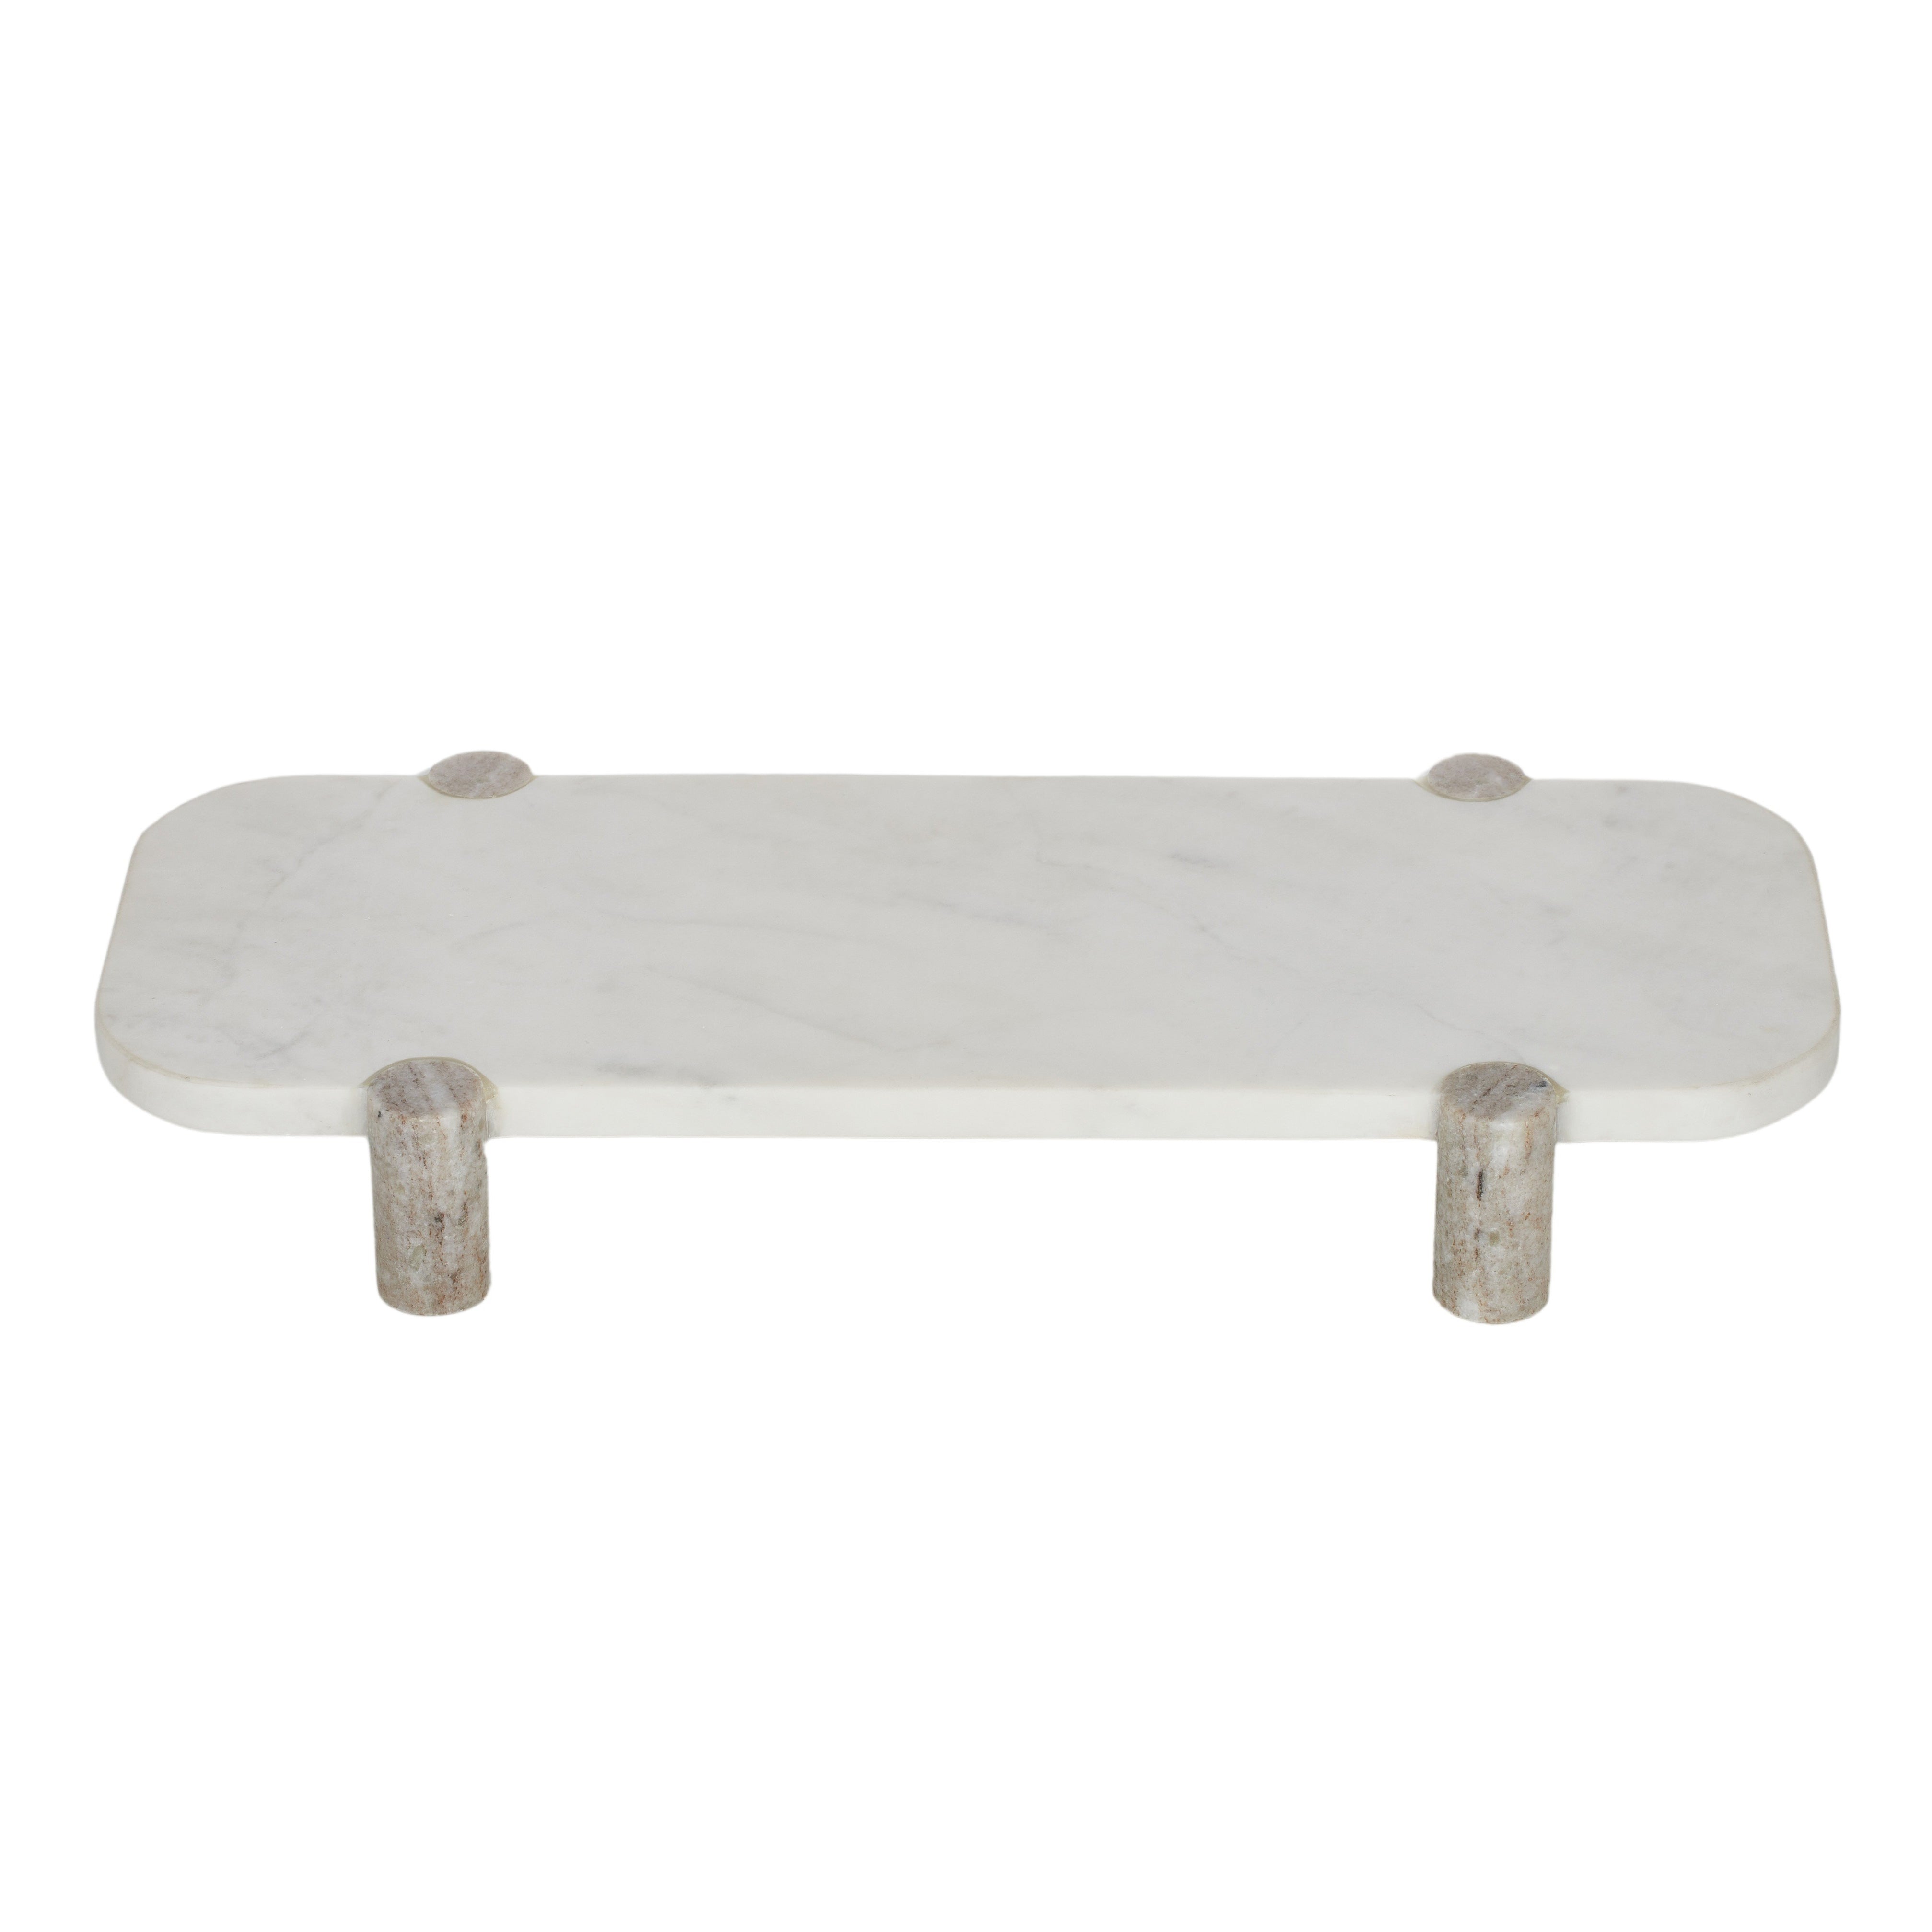 Kitson Rectangle Marble Board 45x20cm White-Dining & Entertaining-Coast To Coast Home-The Bay Room